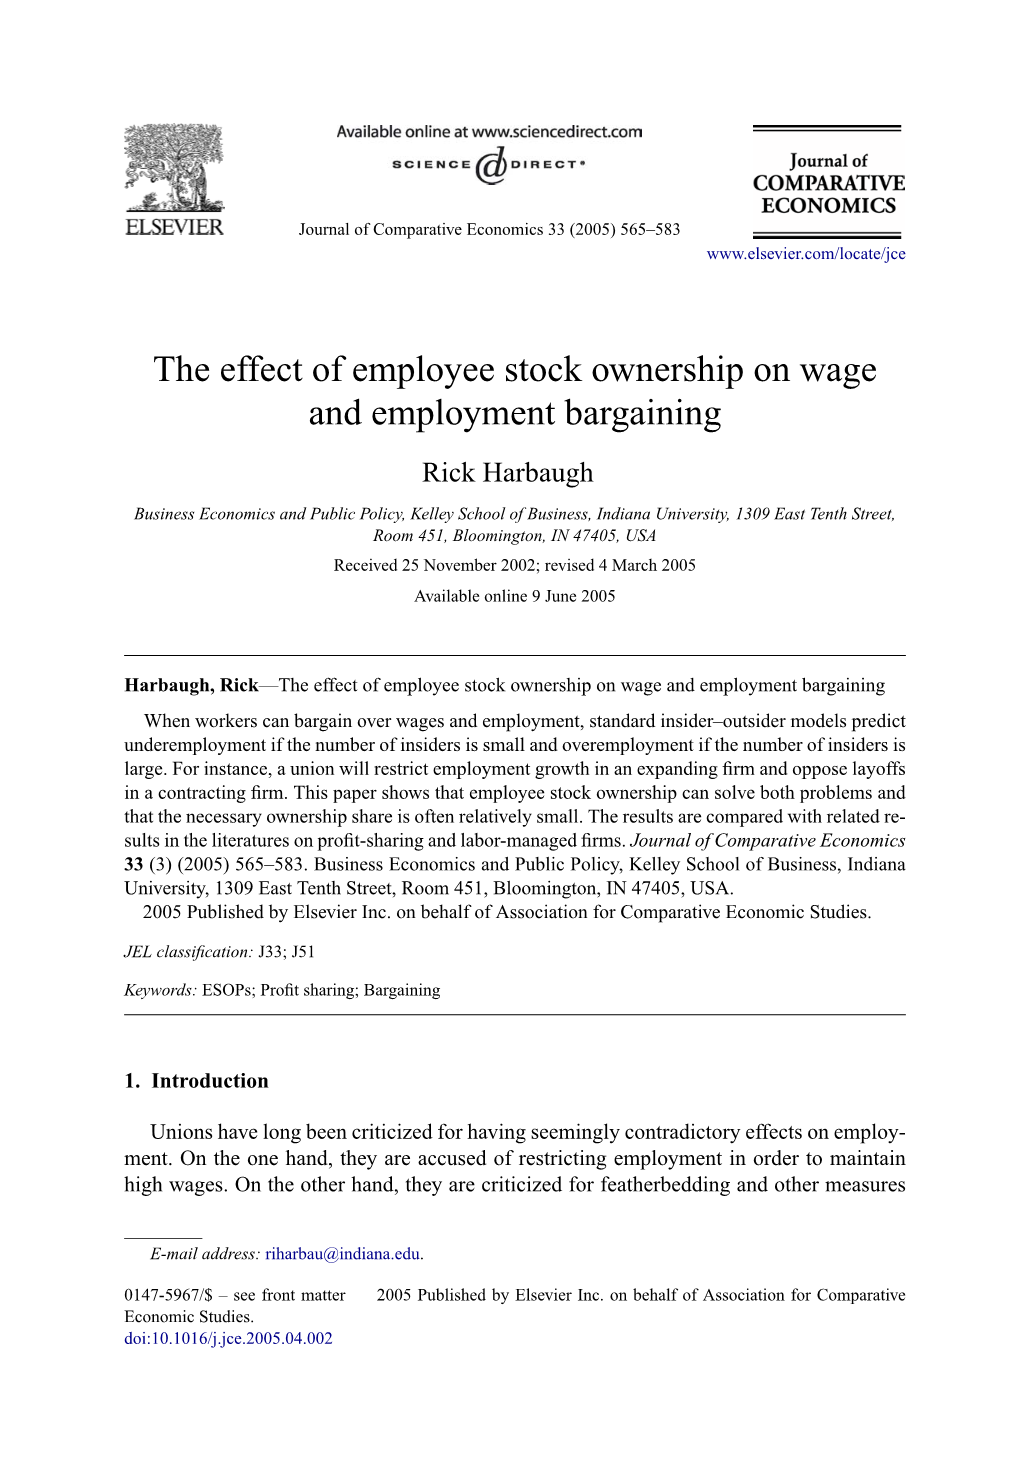 The Effect of Employee Stock Ownership on Wage and Employment Bargaining Rick Harbaugh